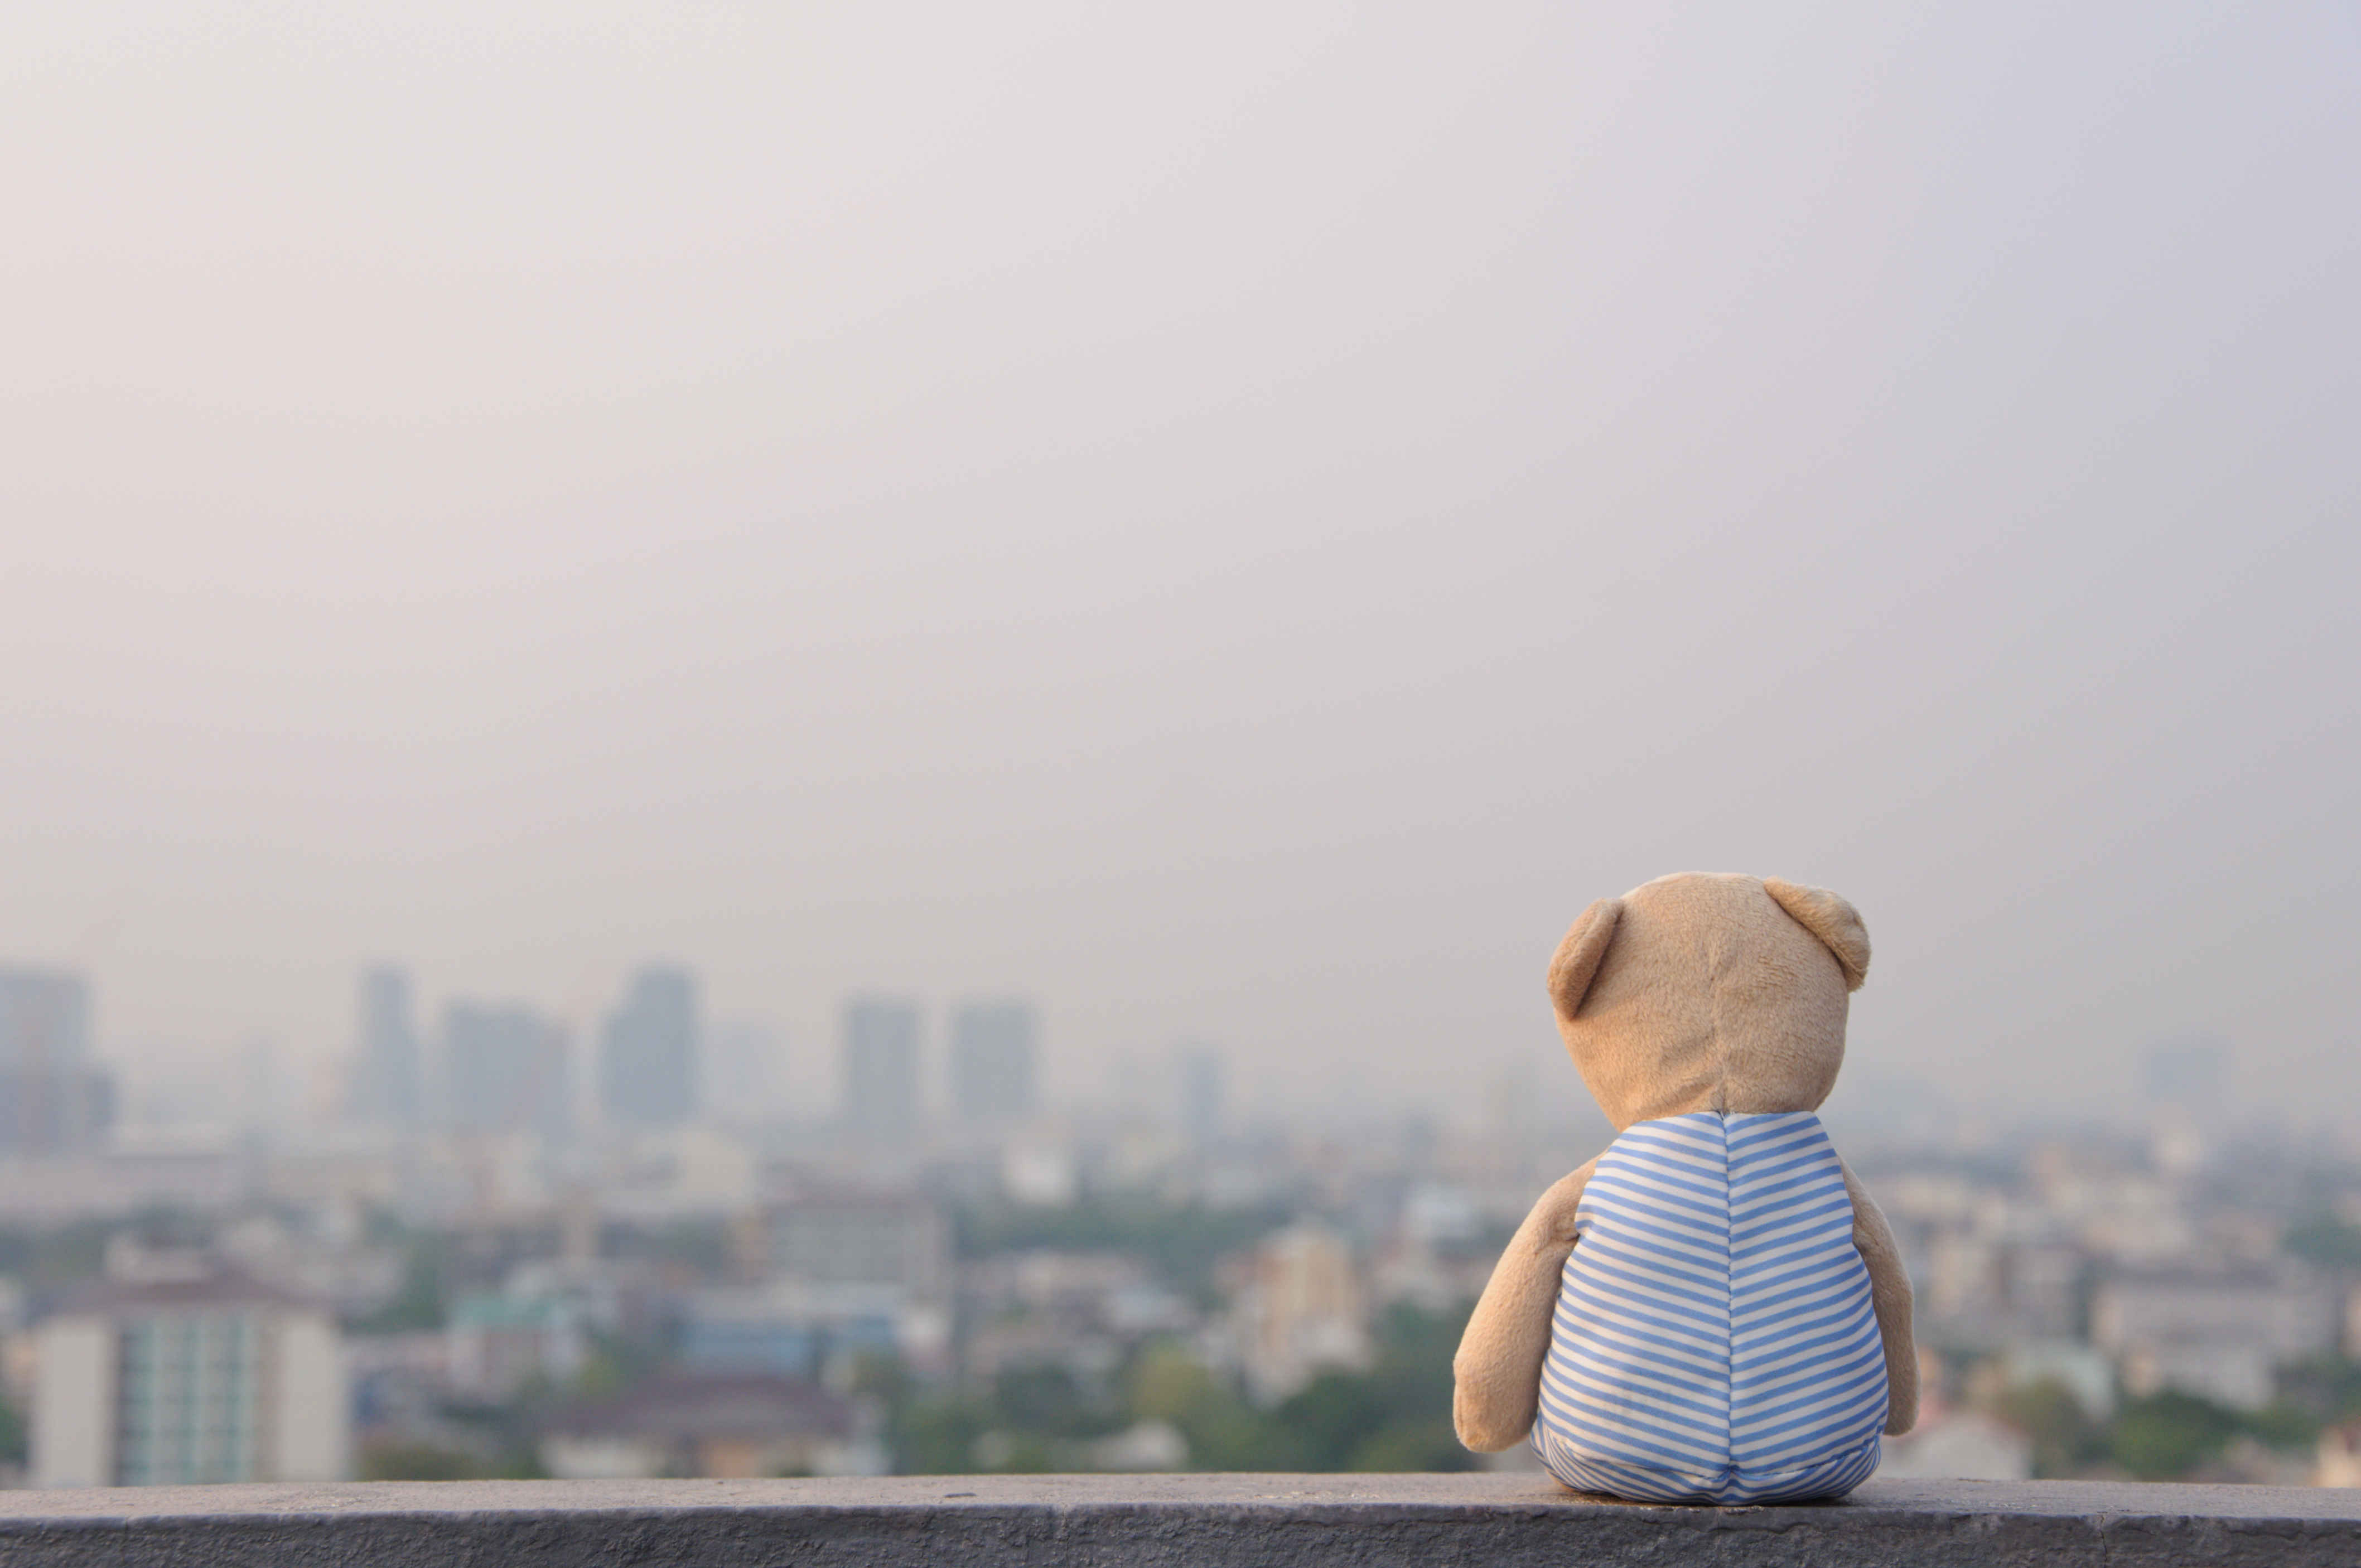 vecteezy_lonely-teddy-bear-sitting-on-the-rooftop-of-the-building-and_12899742_696_low_72dpi.jpg